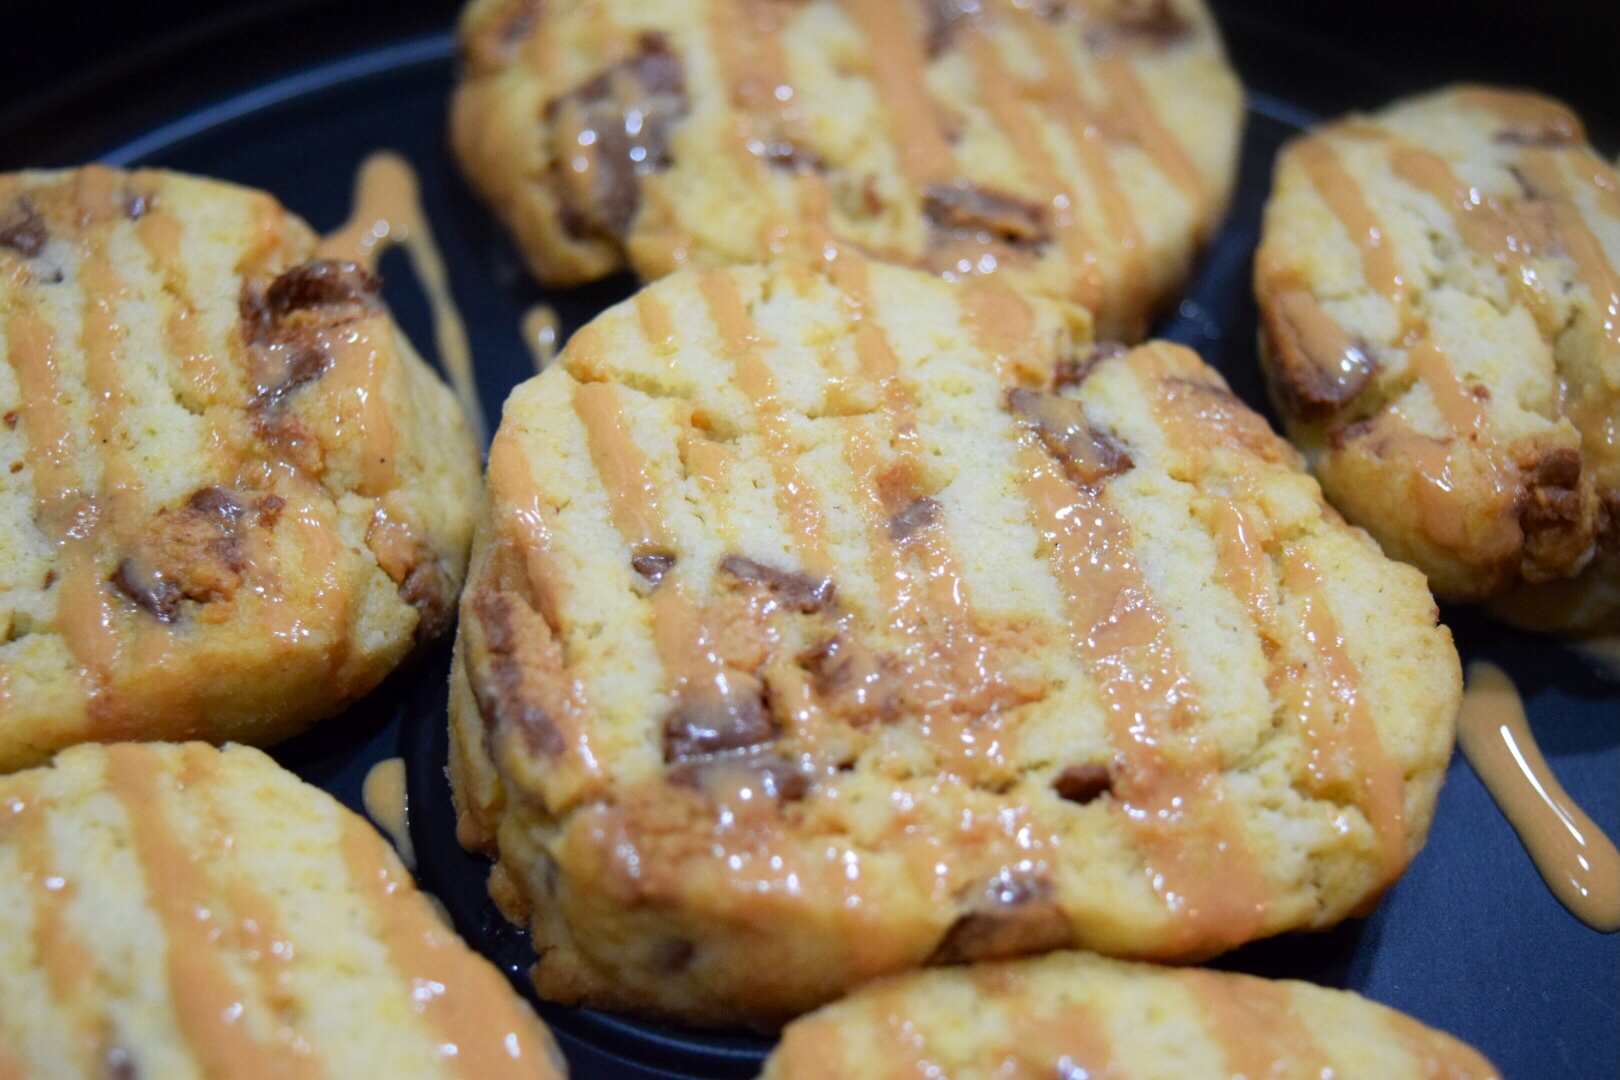 Reese’s Peanut Butter Cup Scones with Caramel Drizzle